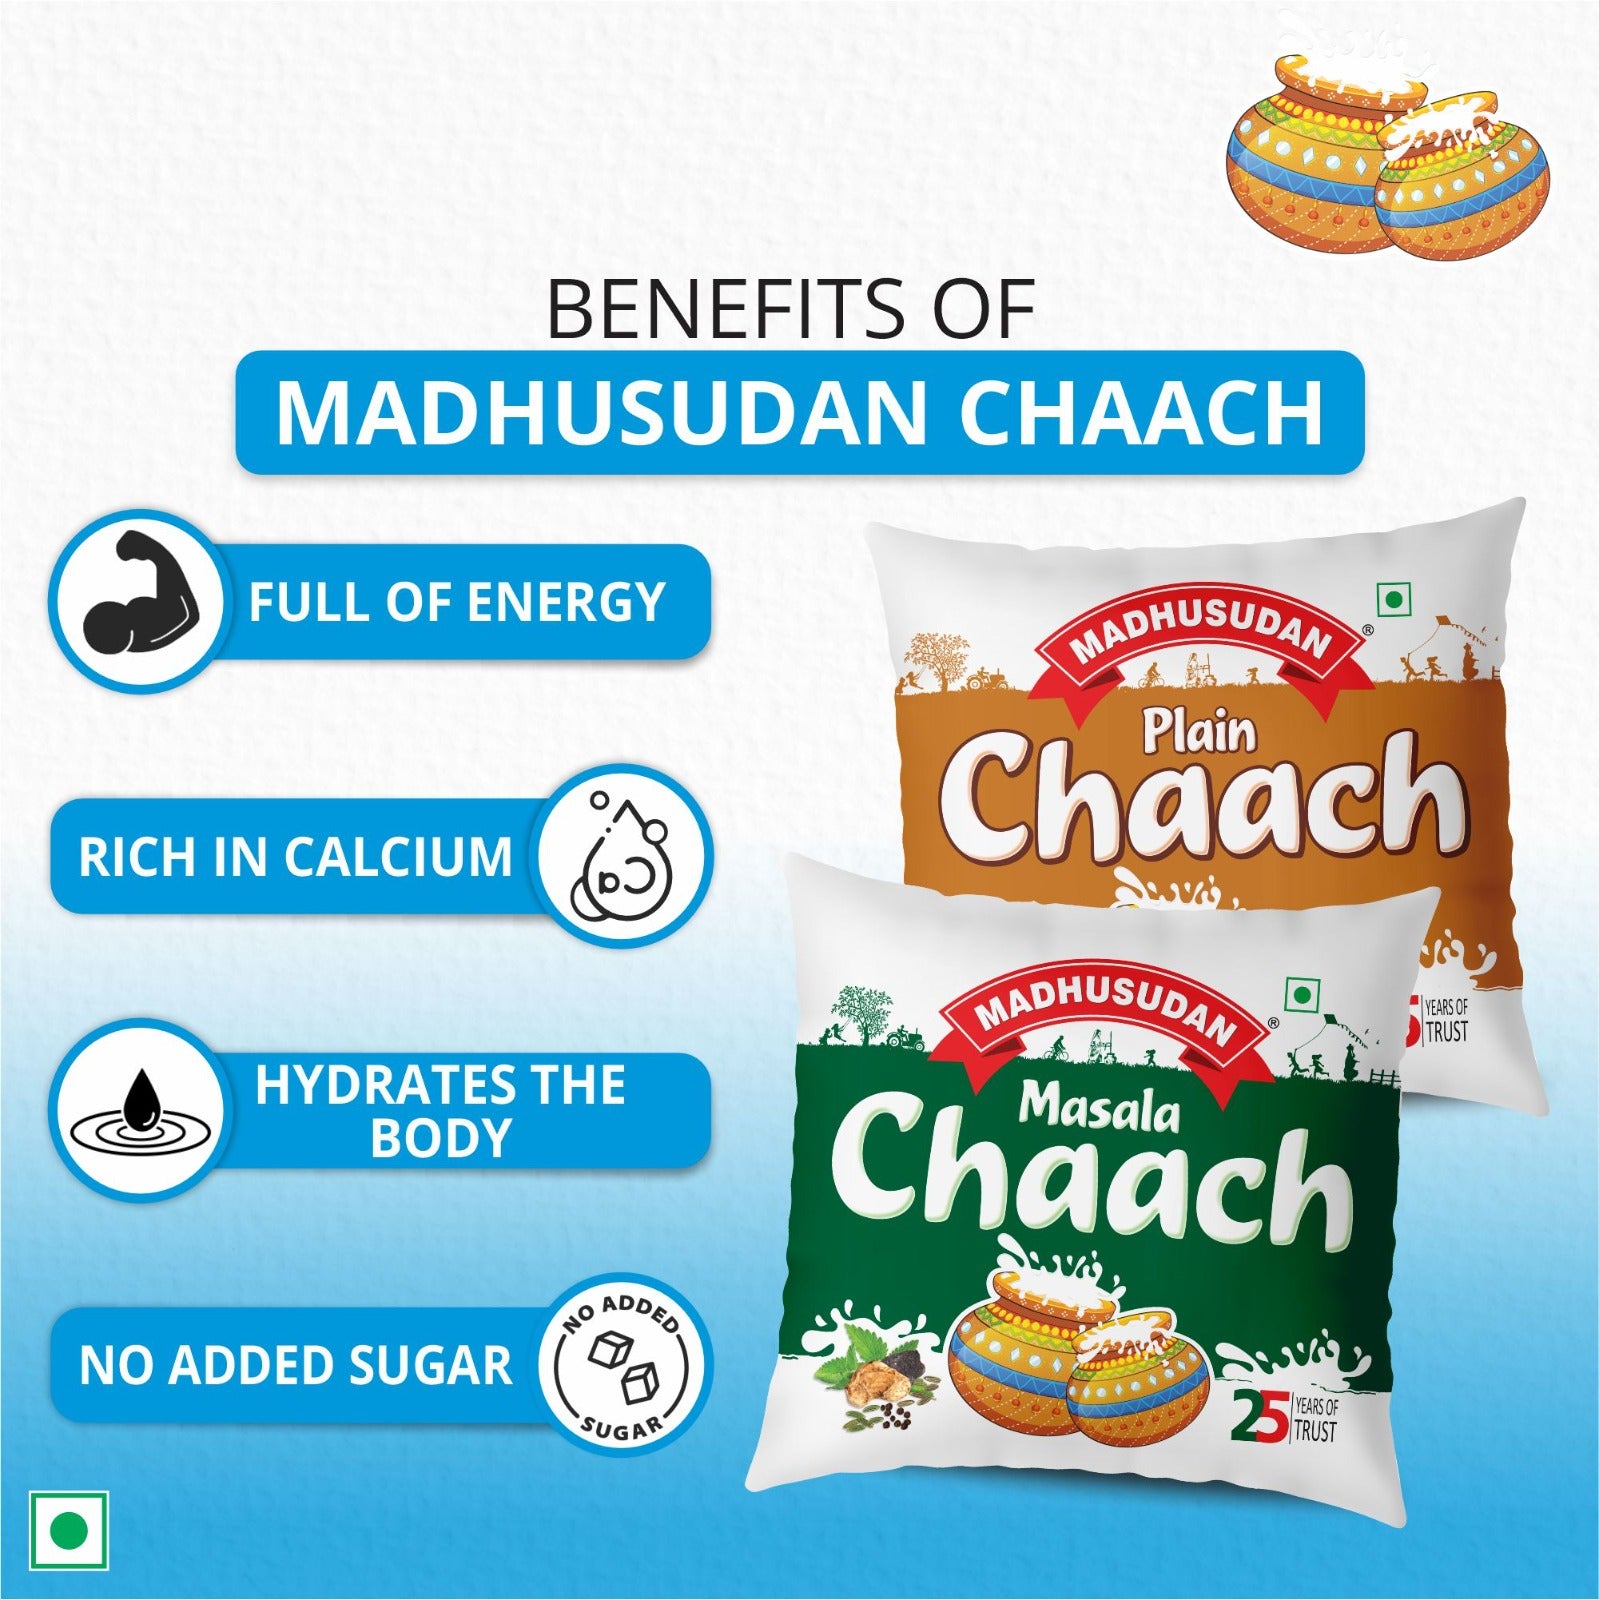 Chaach: The Refreshing and Versatile Beverage Beyond Health Benefits